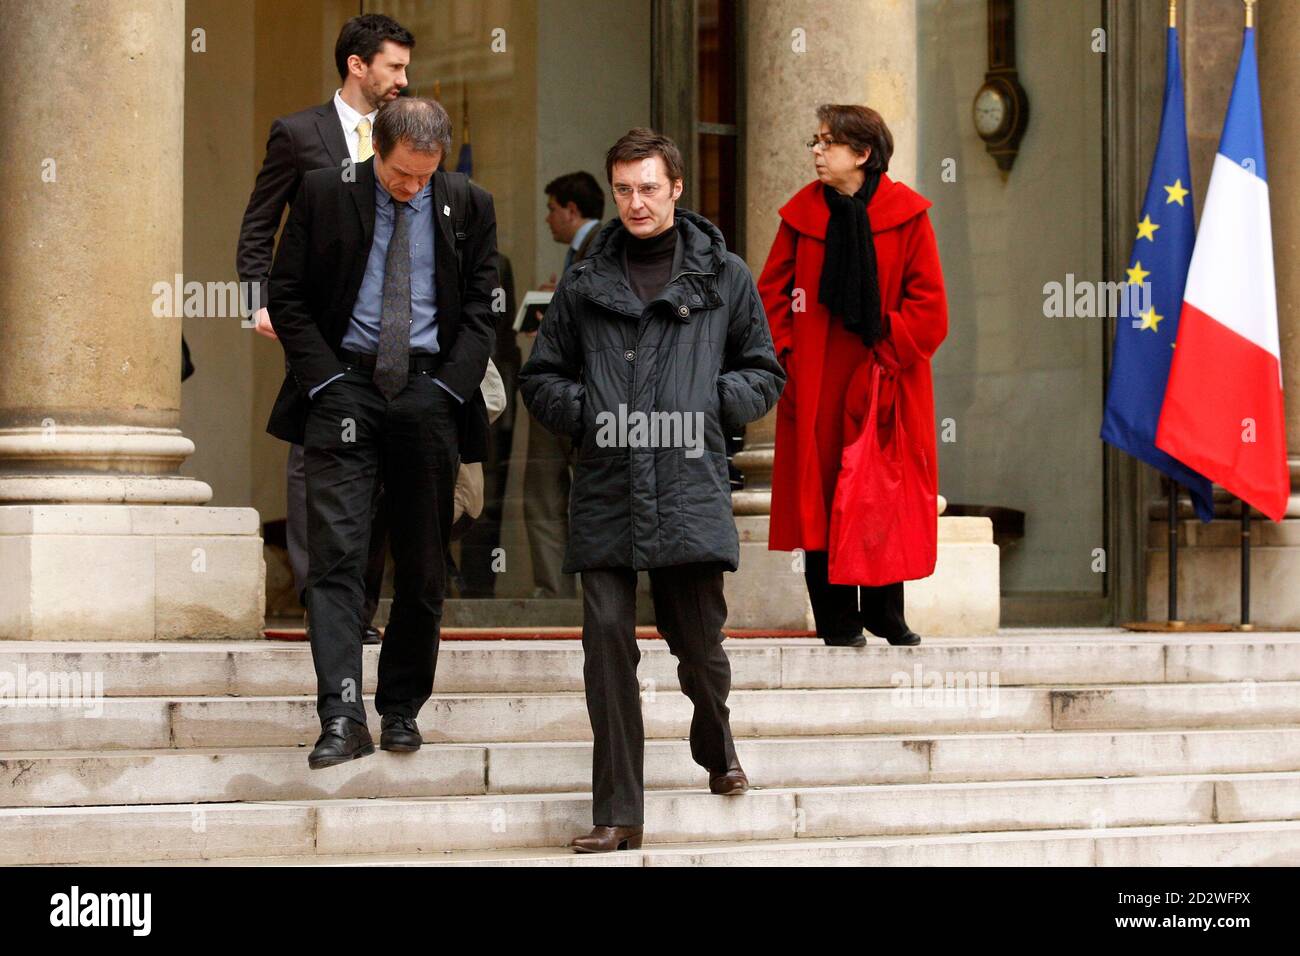 Jean-Stephane Devisse (L), member of WWF France, Pascal Husting (C),  director of Greenpeace France, and Cecile Ostria (R), director of Fondation  Hulot, leave after a meeting with Non Governmental Organisations (NGO) at